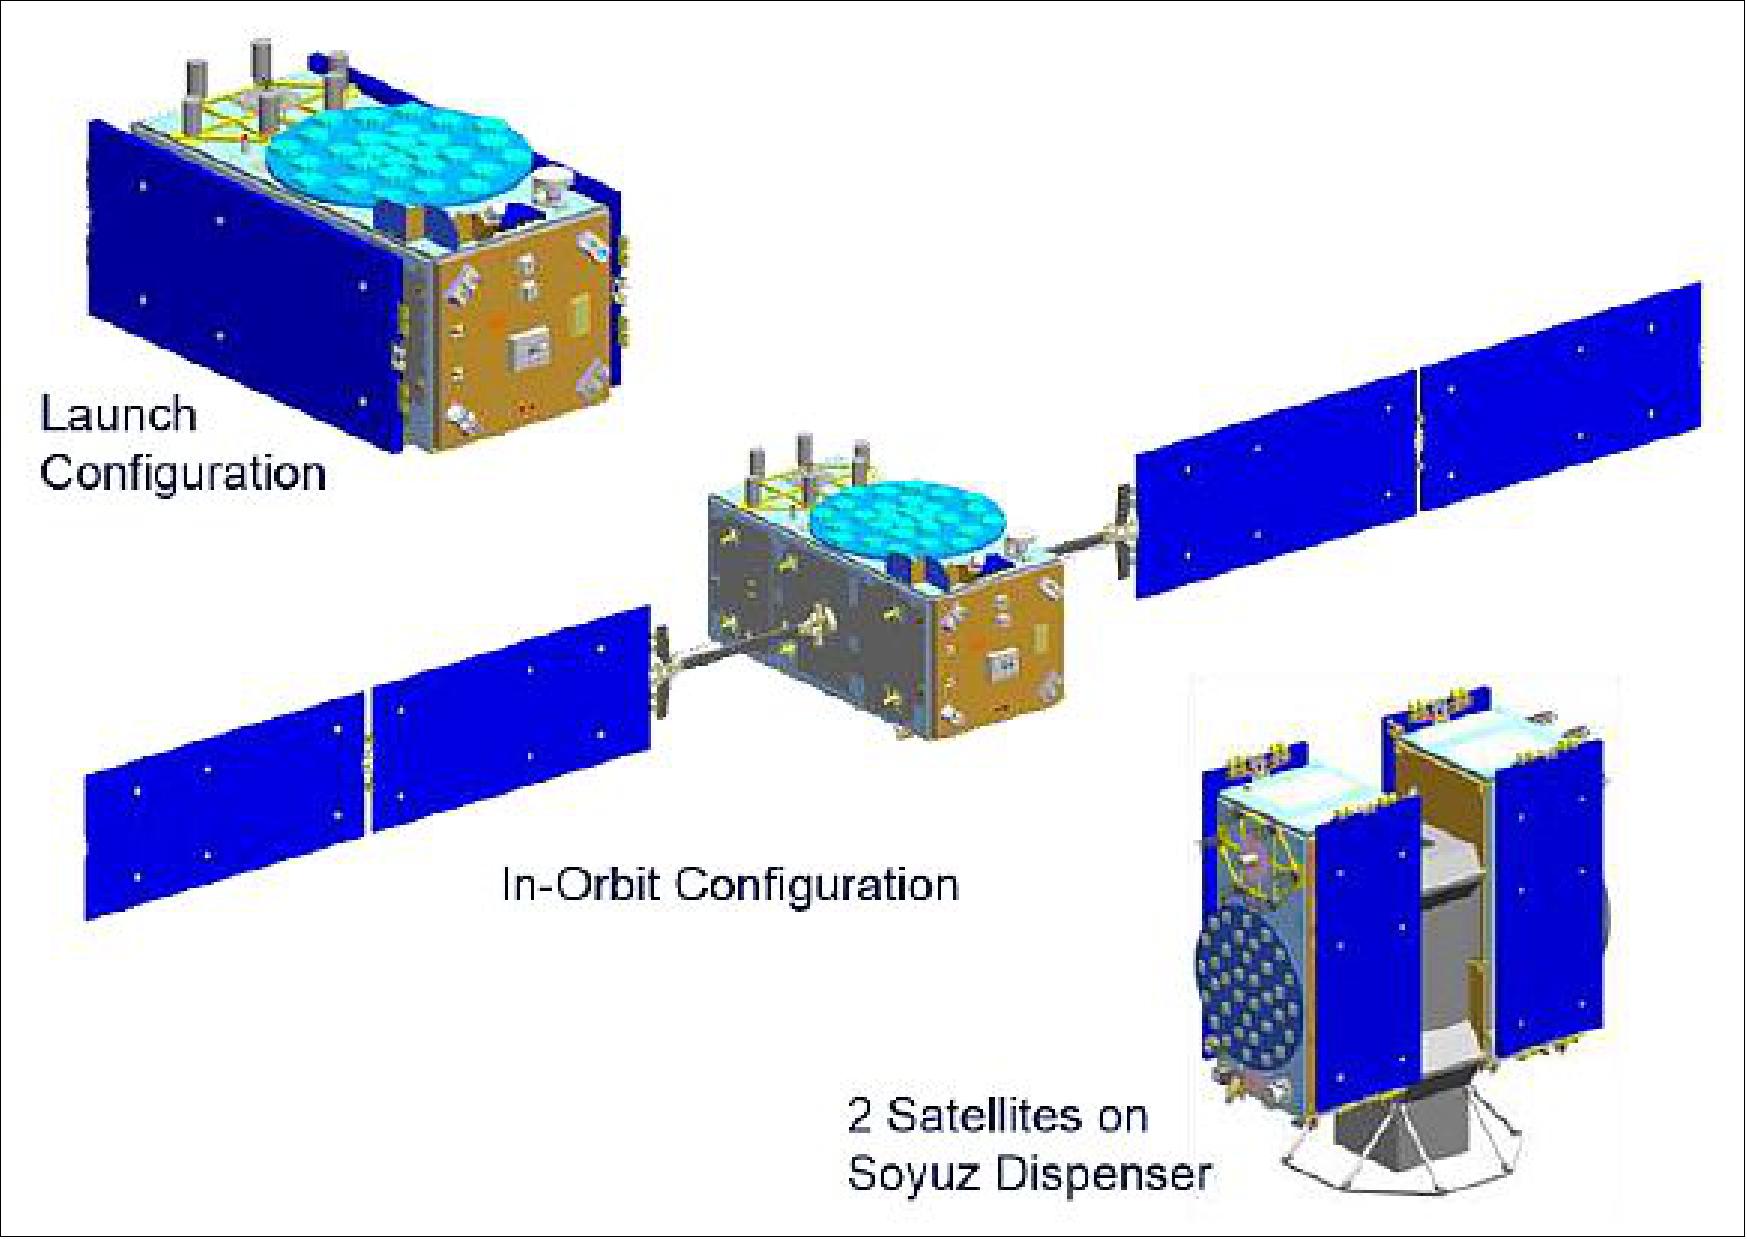 Figure 22: Illustration of satellite configurations in various mission phases (image credit: OHB System)